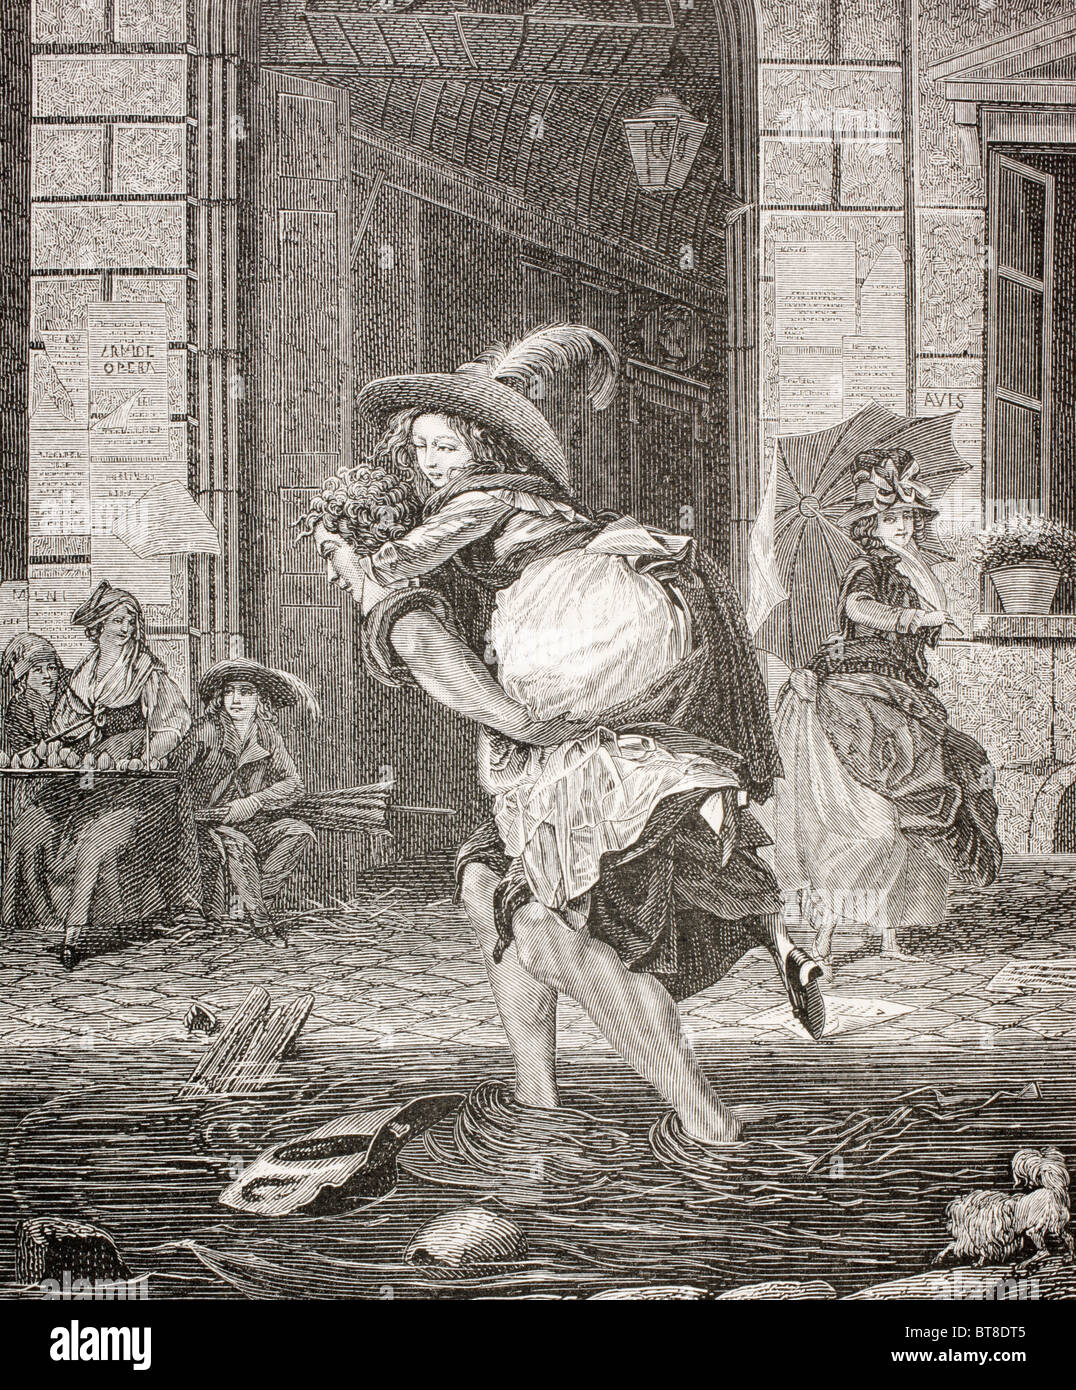 A carrier ferrying a woman across the street on a rainy day in 18th century Paris. Stock Photo